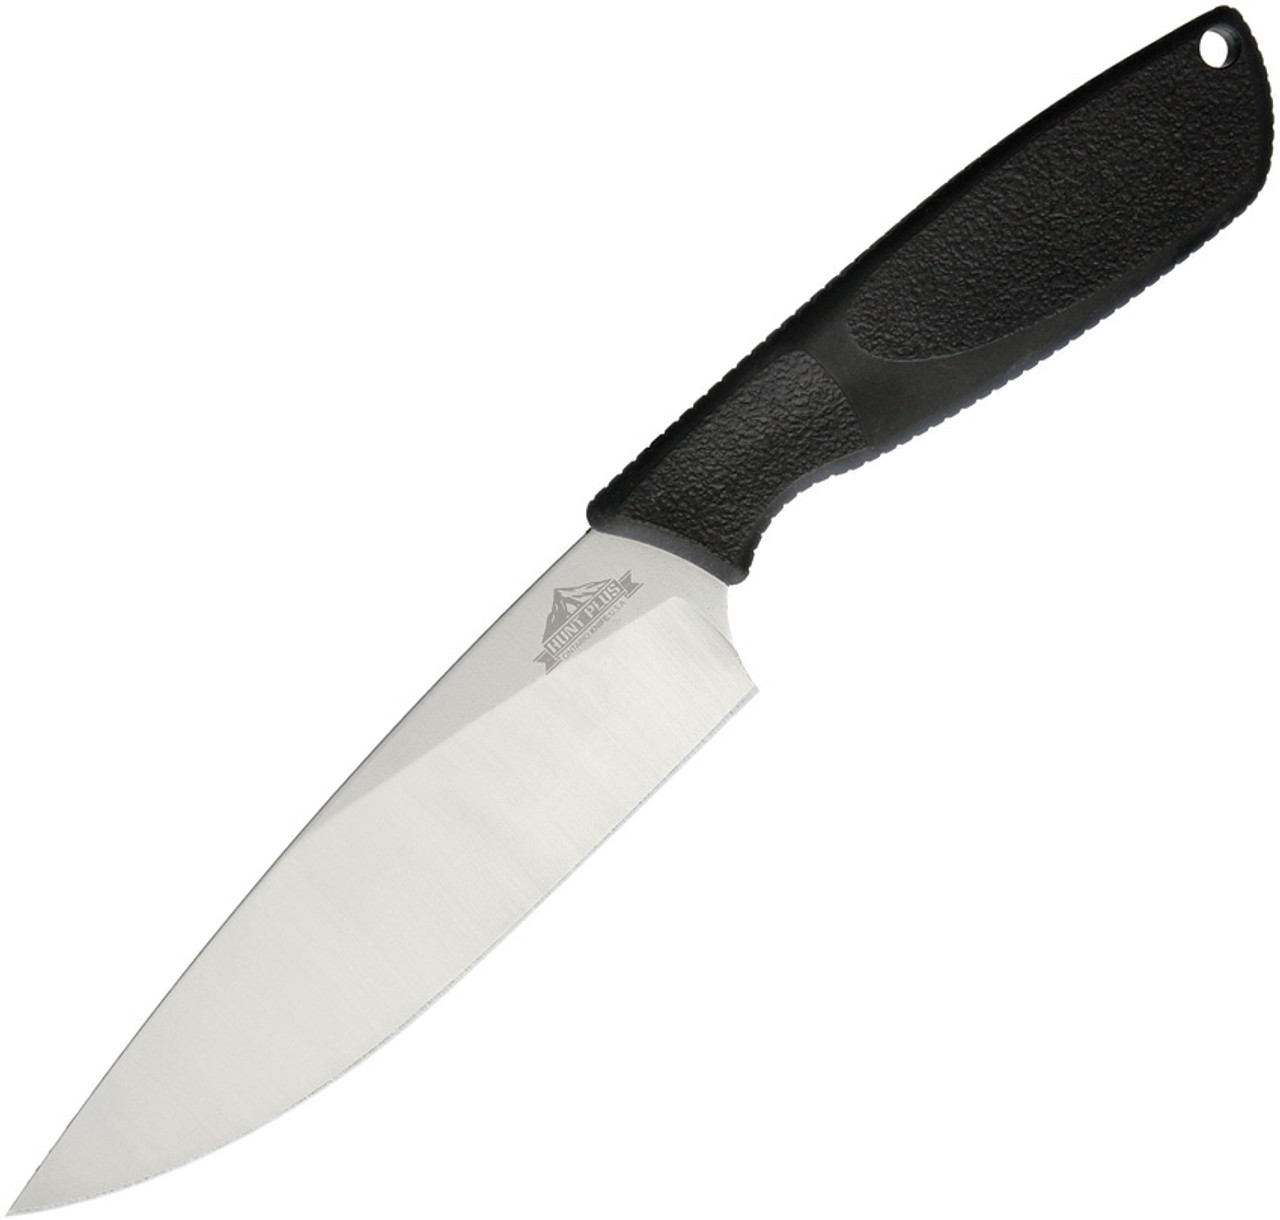 Ontario Knife Co. Hunt Plus Camp Knife  9717, 6.25" Stainless Steel Satin Plain Blade, Black Synthetic Rubber Handle